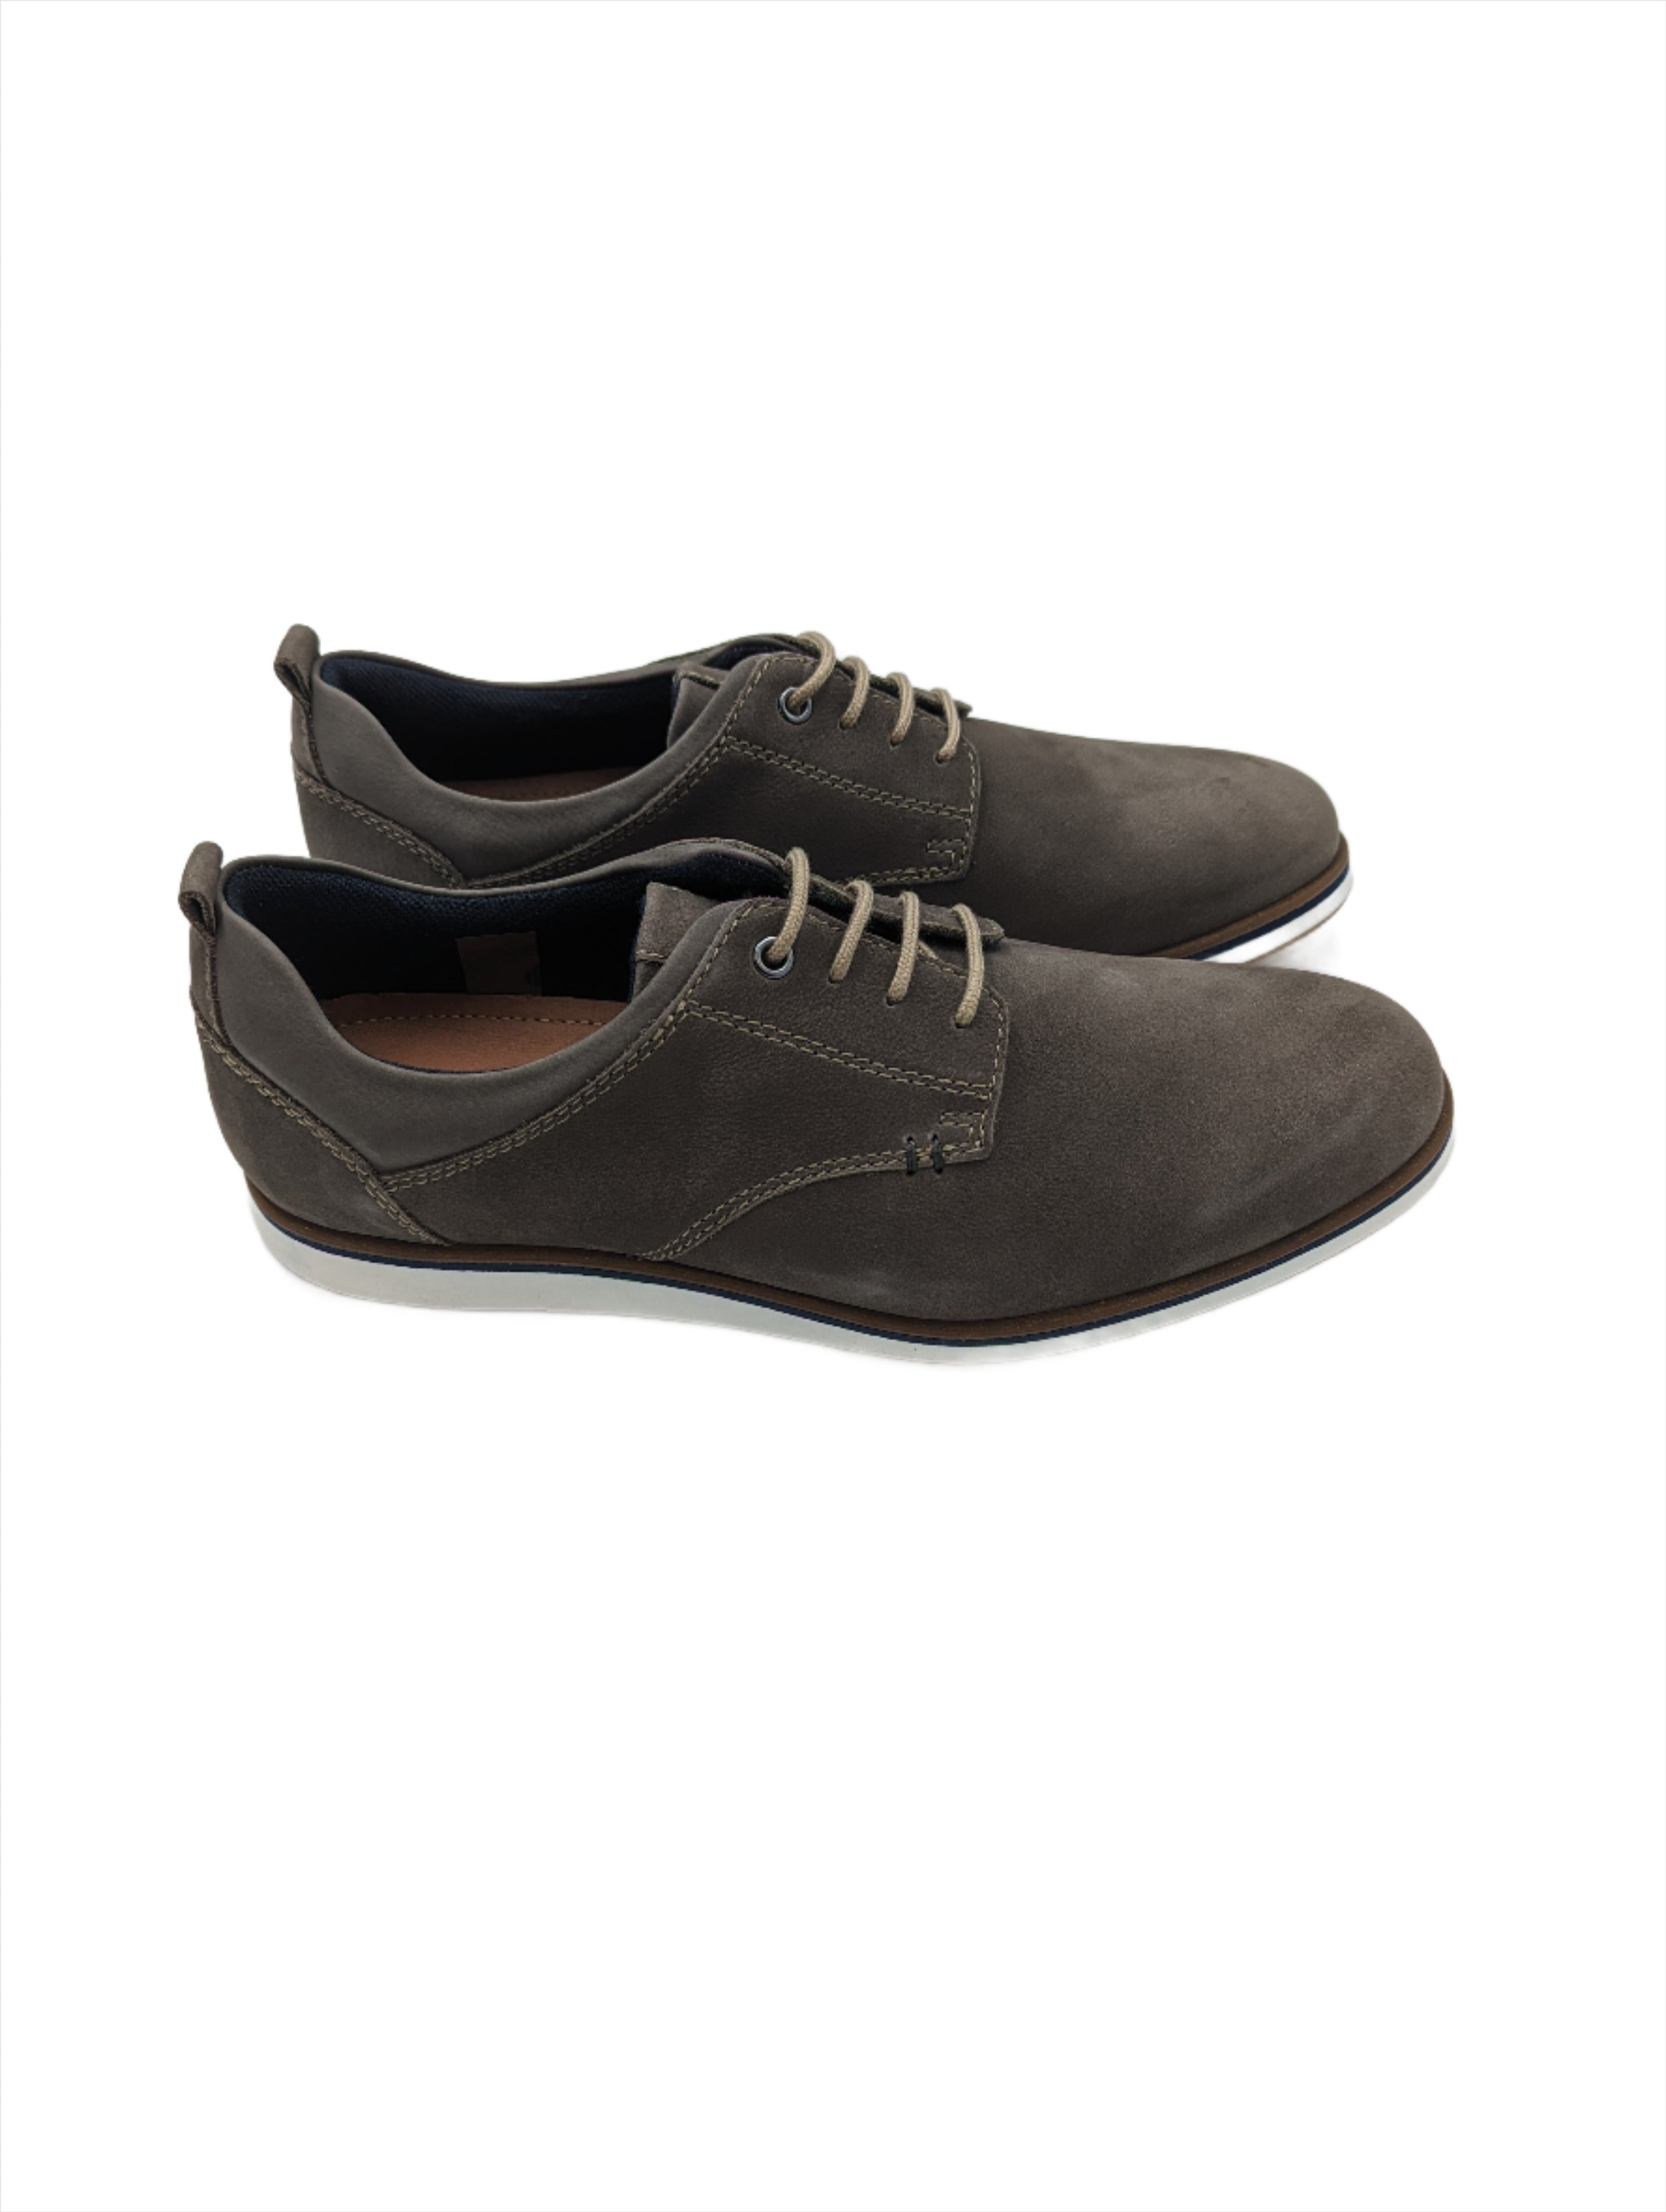 Stafford Pebble lace up shoe-Side view